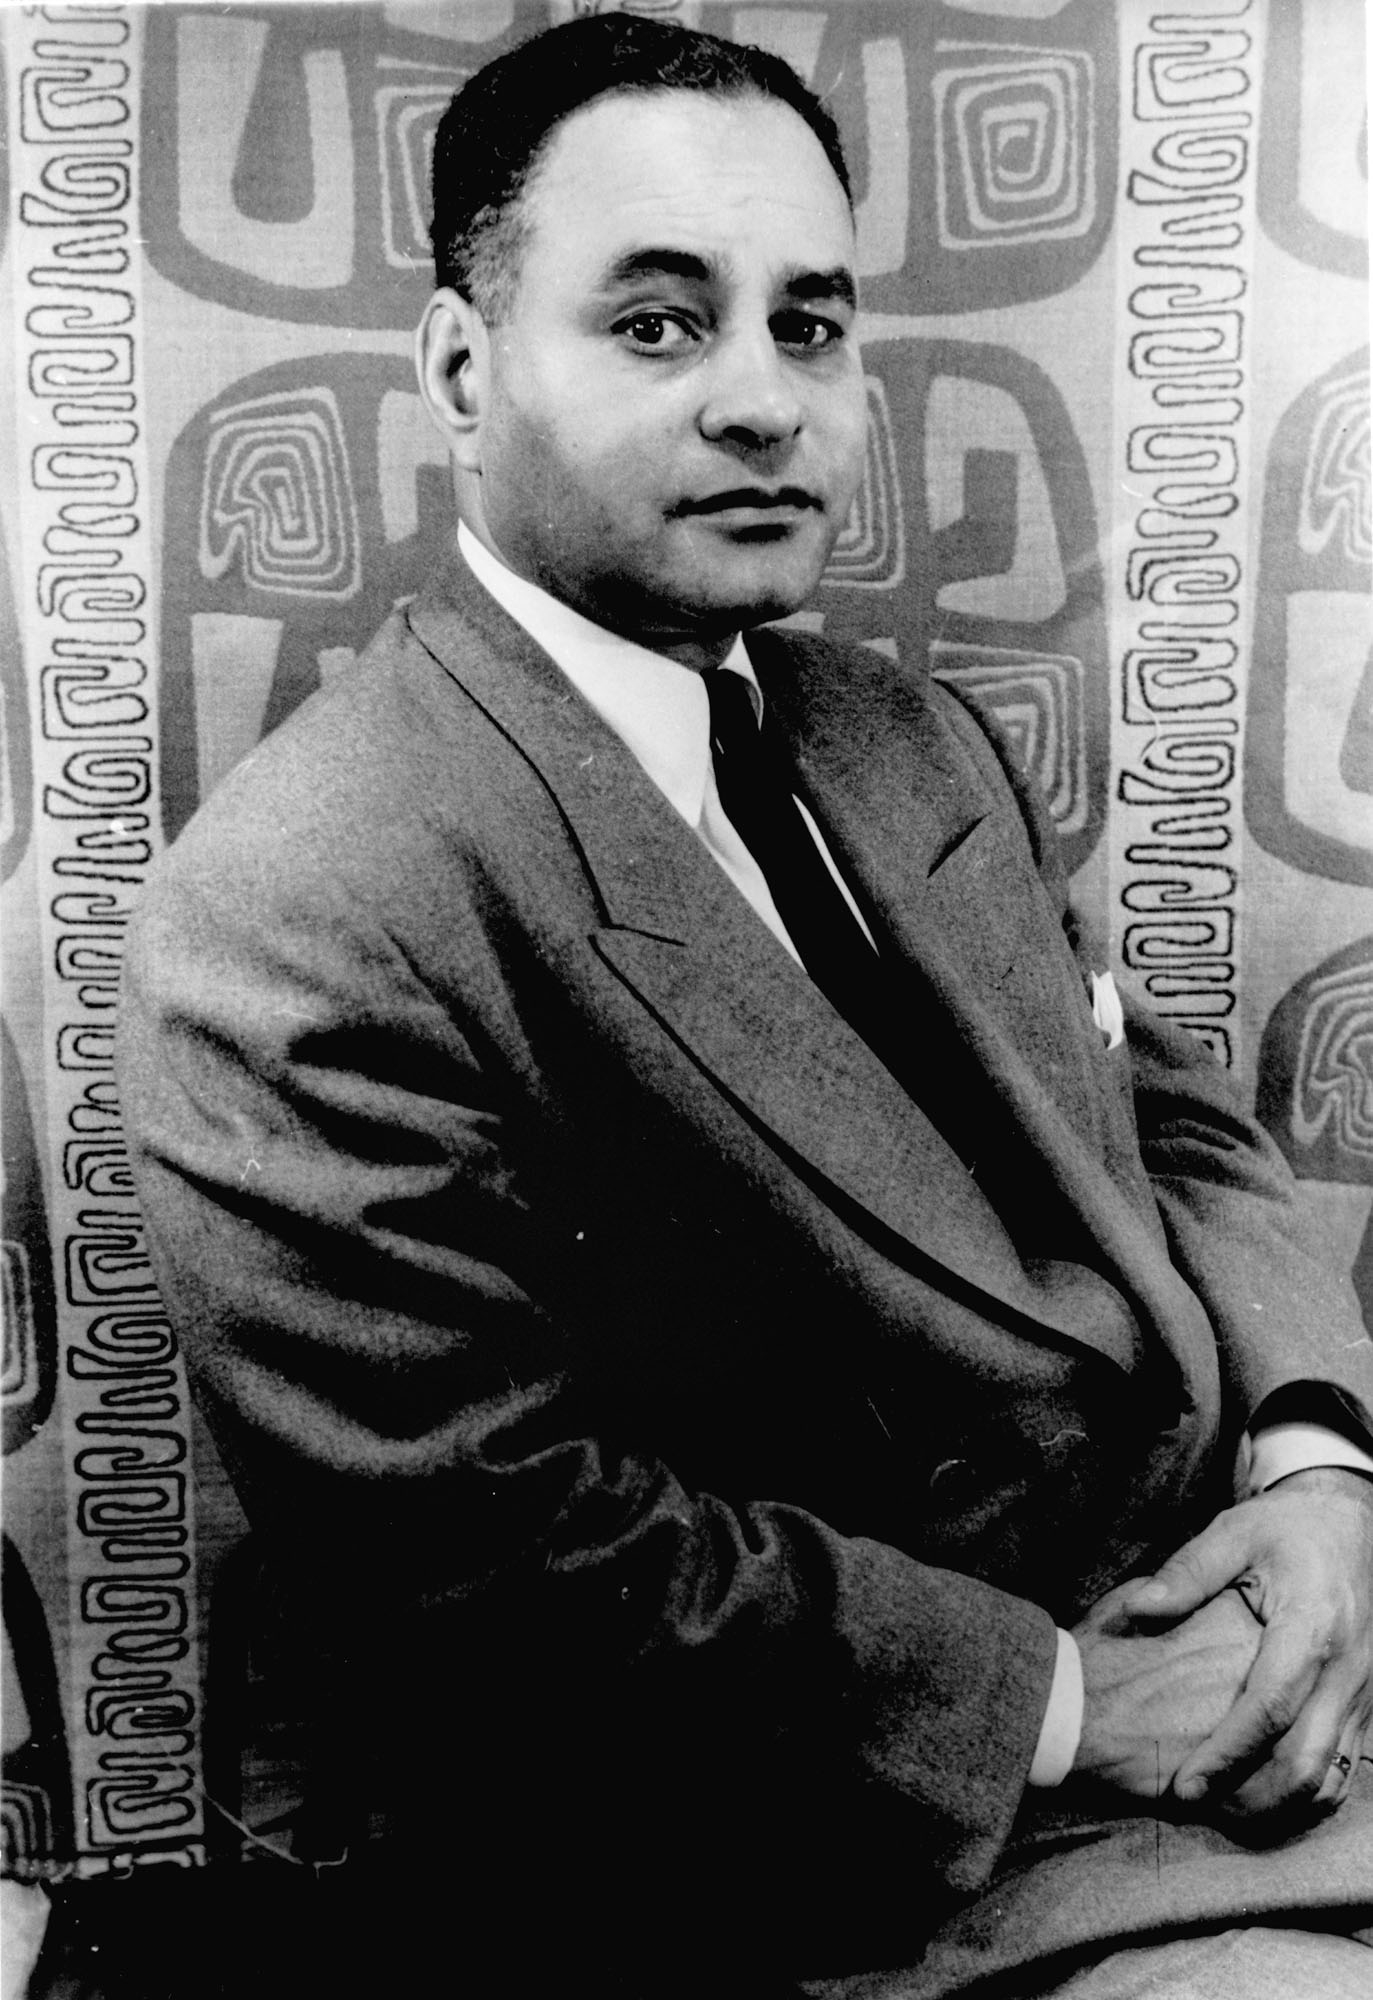 Ralph A. Bunche, UN negotiator for the Arab-Israeli conflict, becomes the first African American elected to CFR membership.